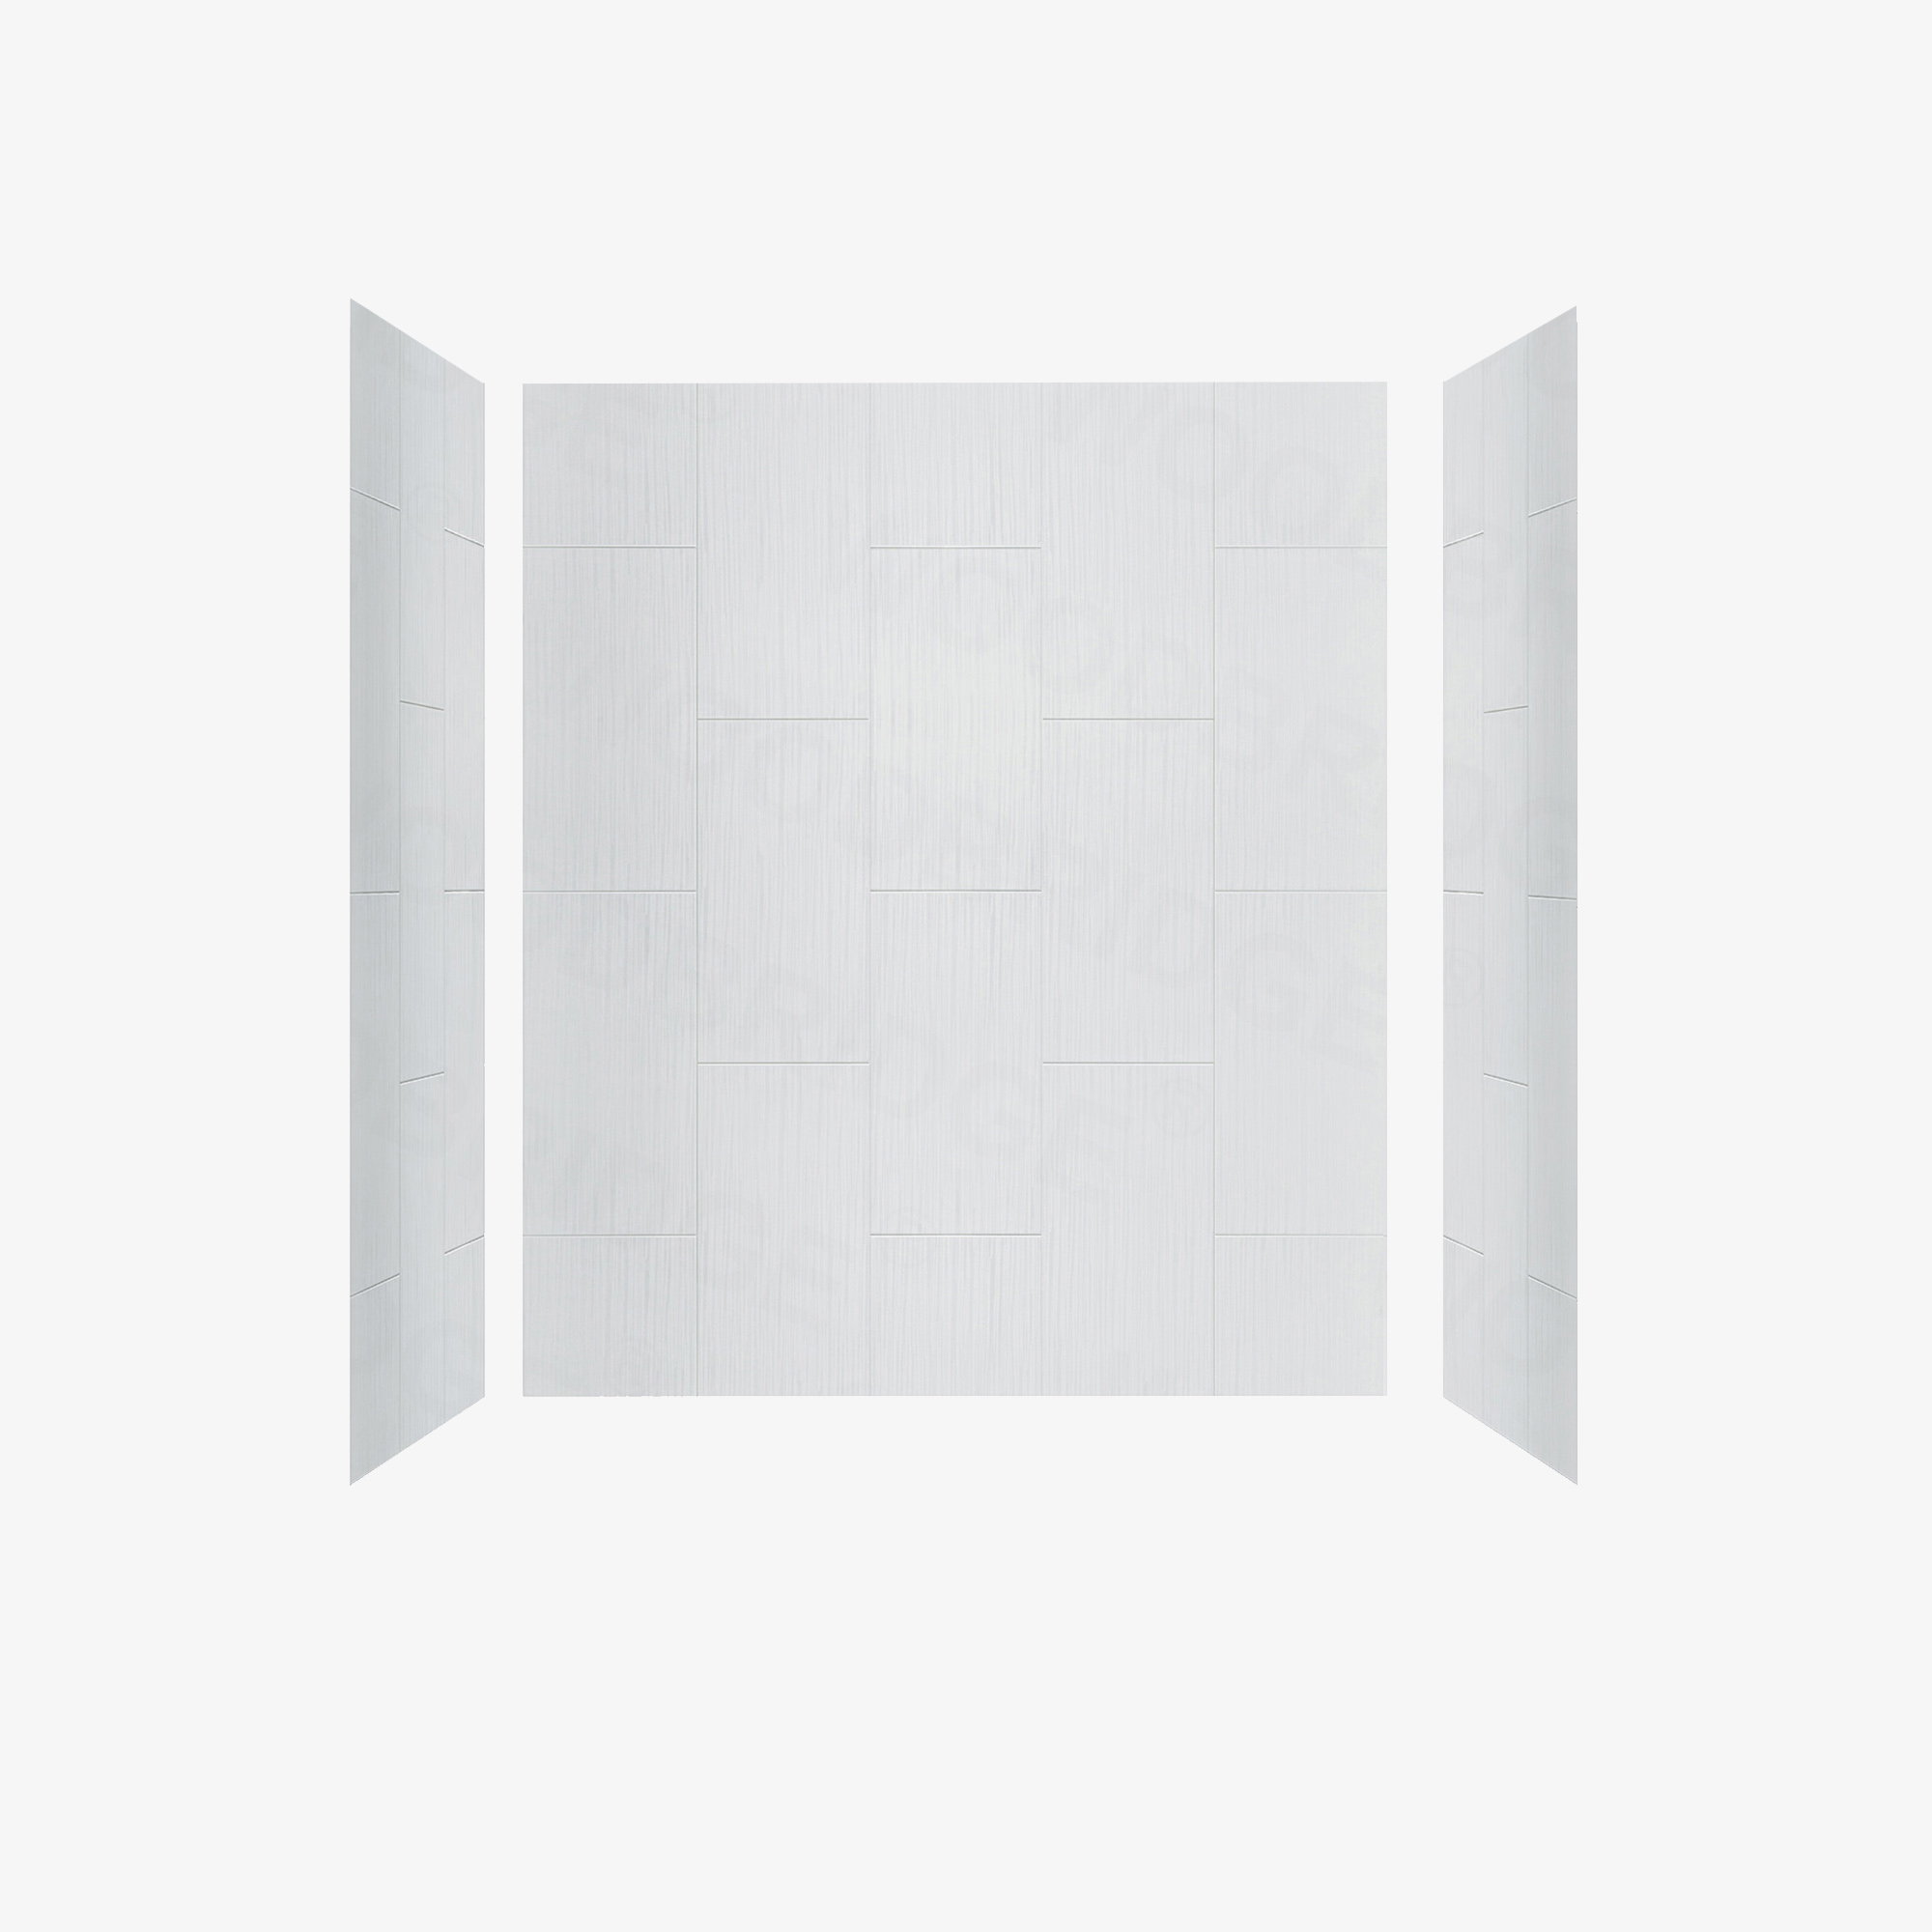  WOODBRIDGE Solid Surface 3-Panel Shower Wall Kit, 36-in L x 60-in W x 75-in H, Stacked Block in a Staggered Vertical Pattern. Matte White Finish_11716